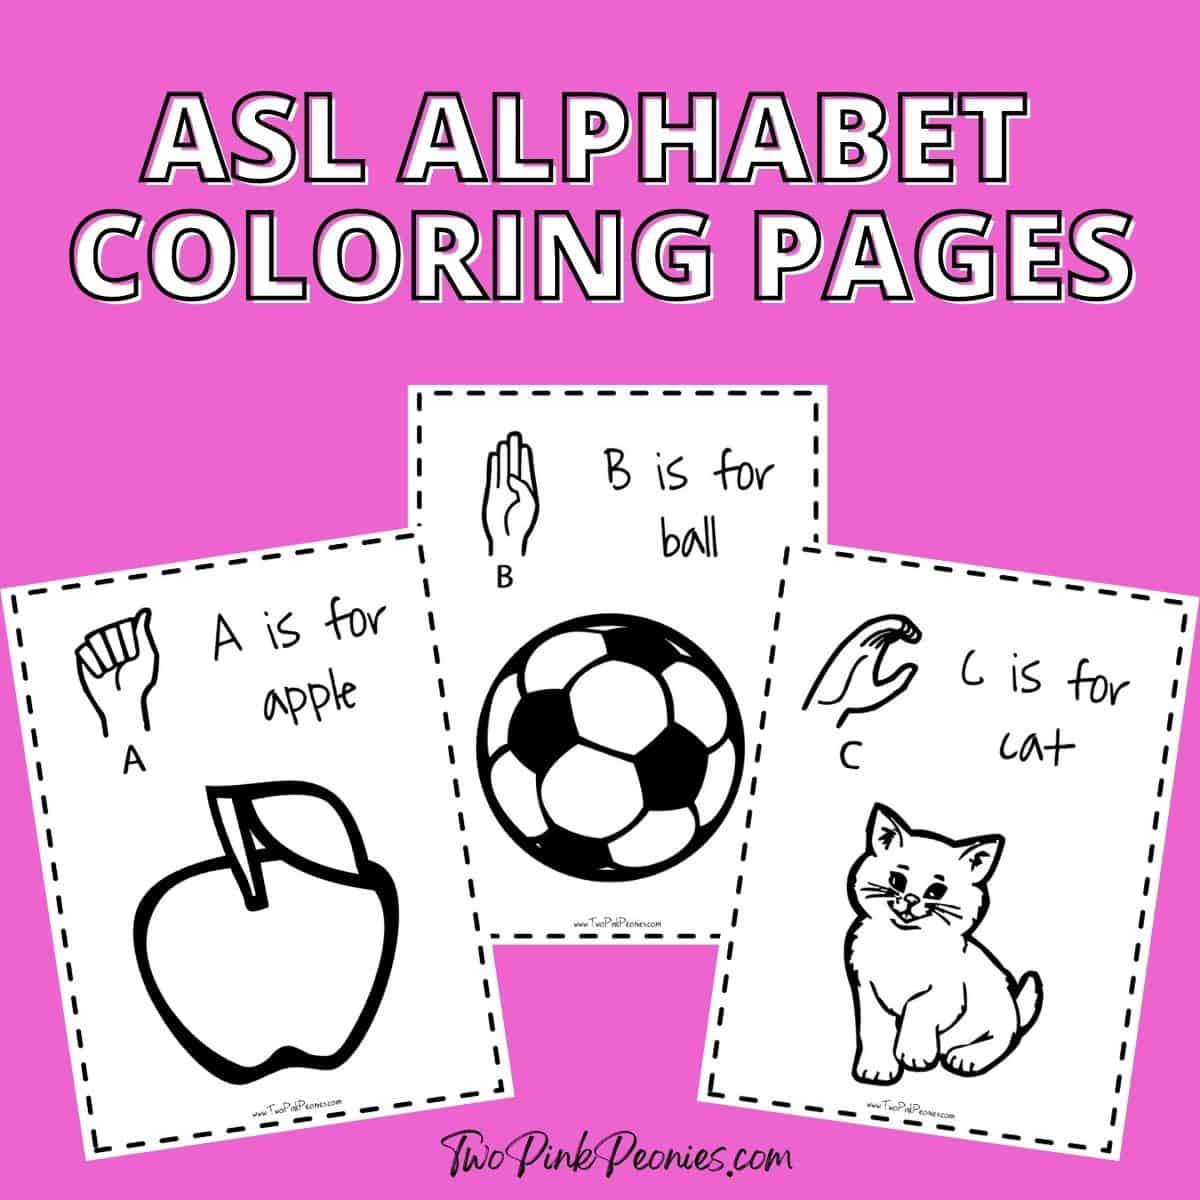 text that says ASL alphabet coloring pages below the text are mock ups of the A, B, and C coloring pages